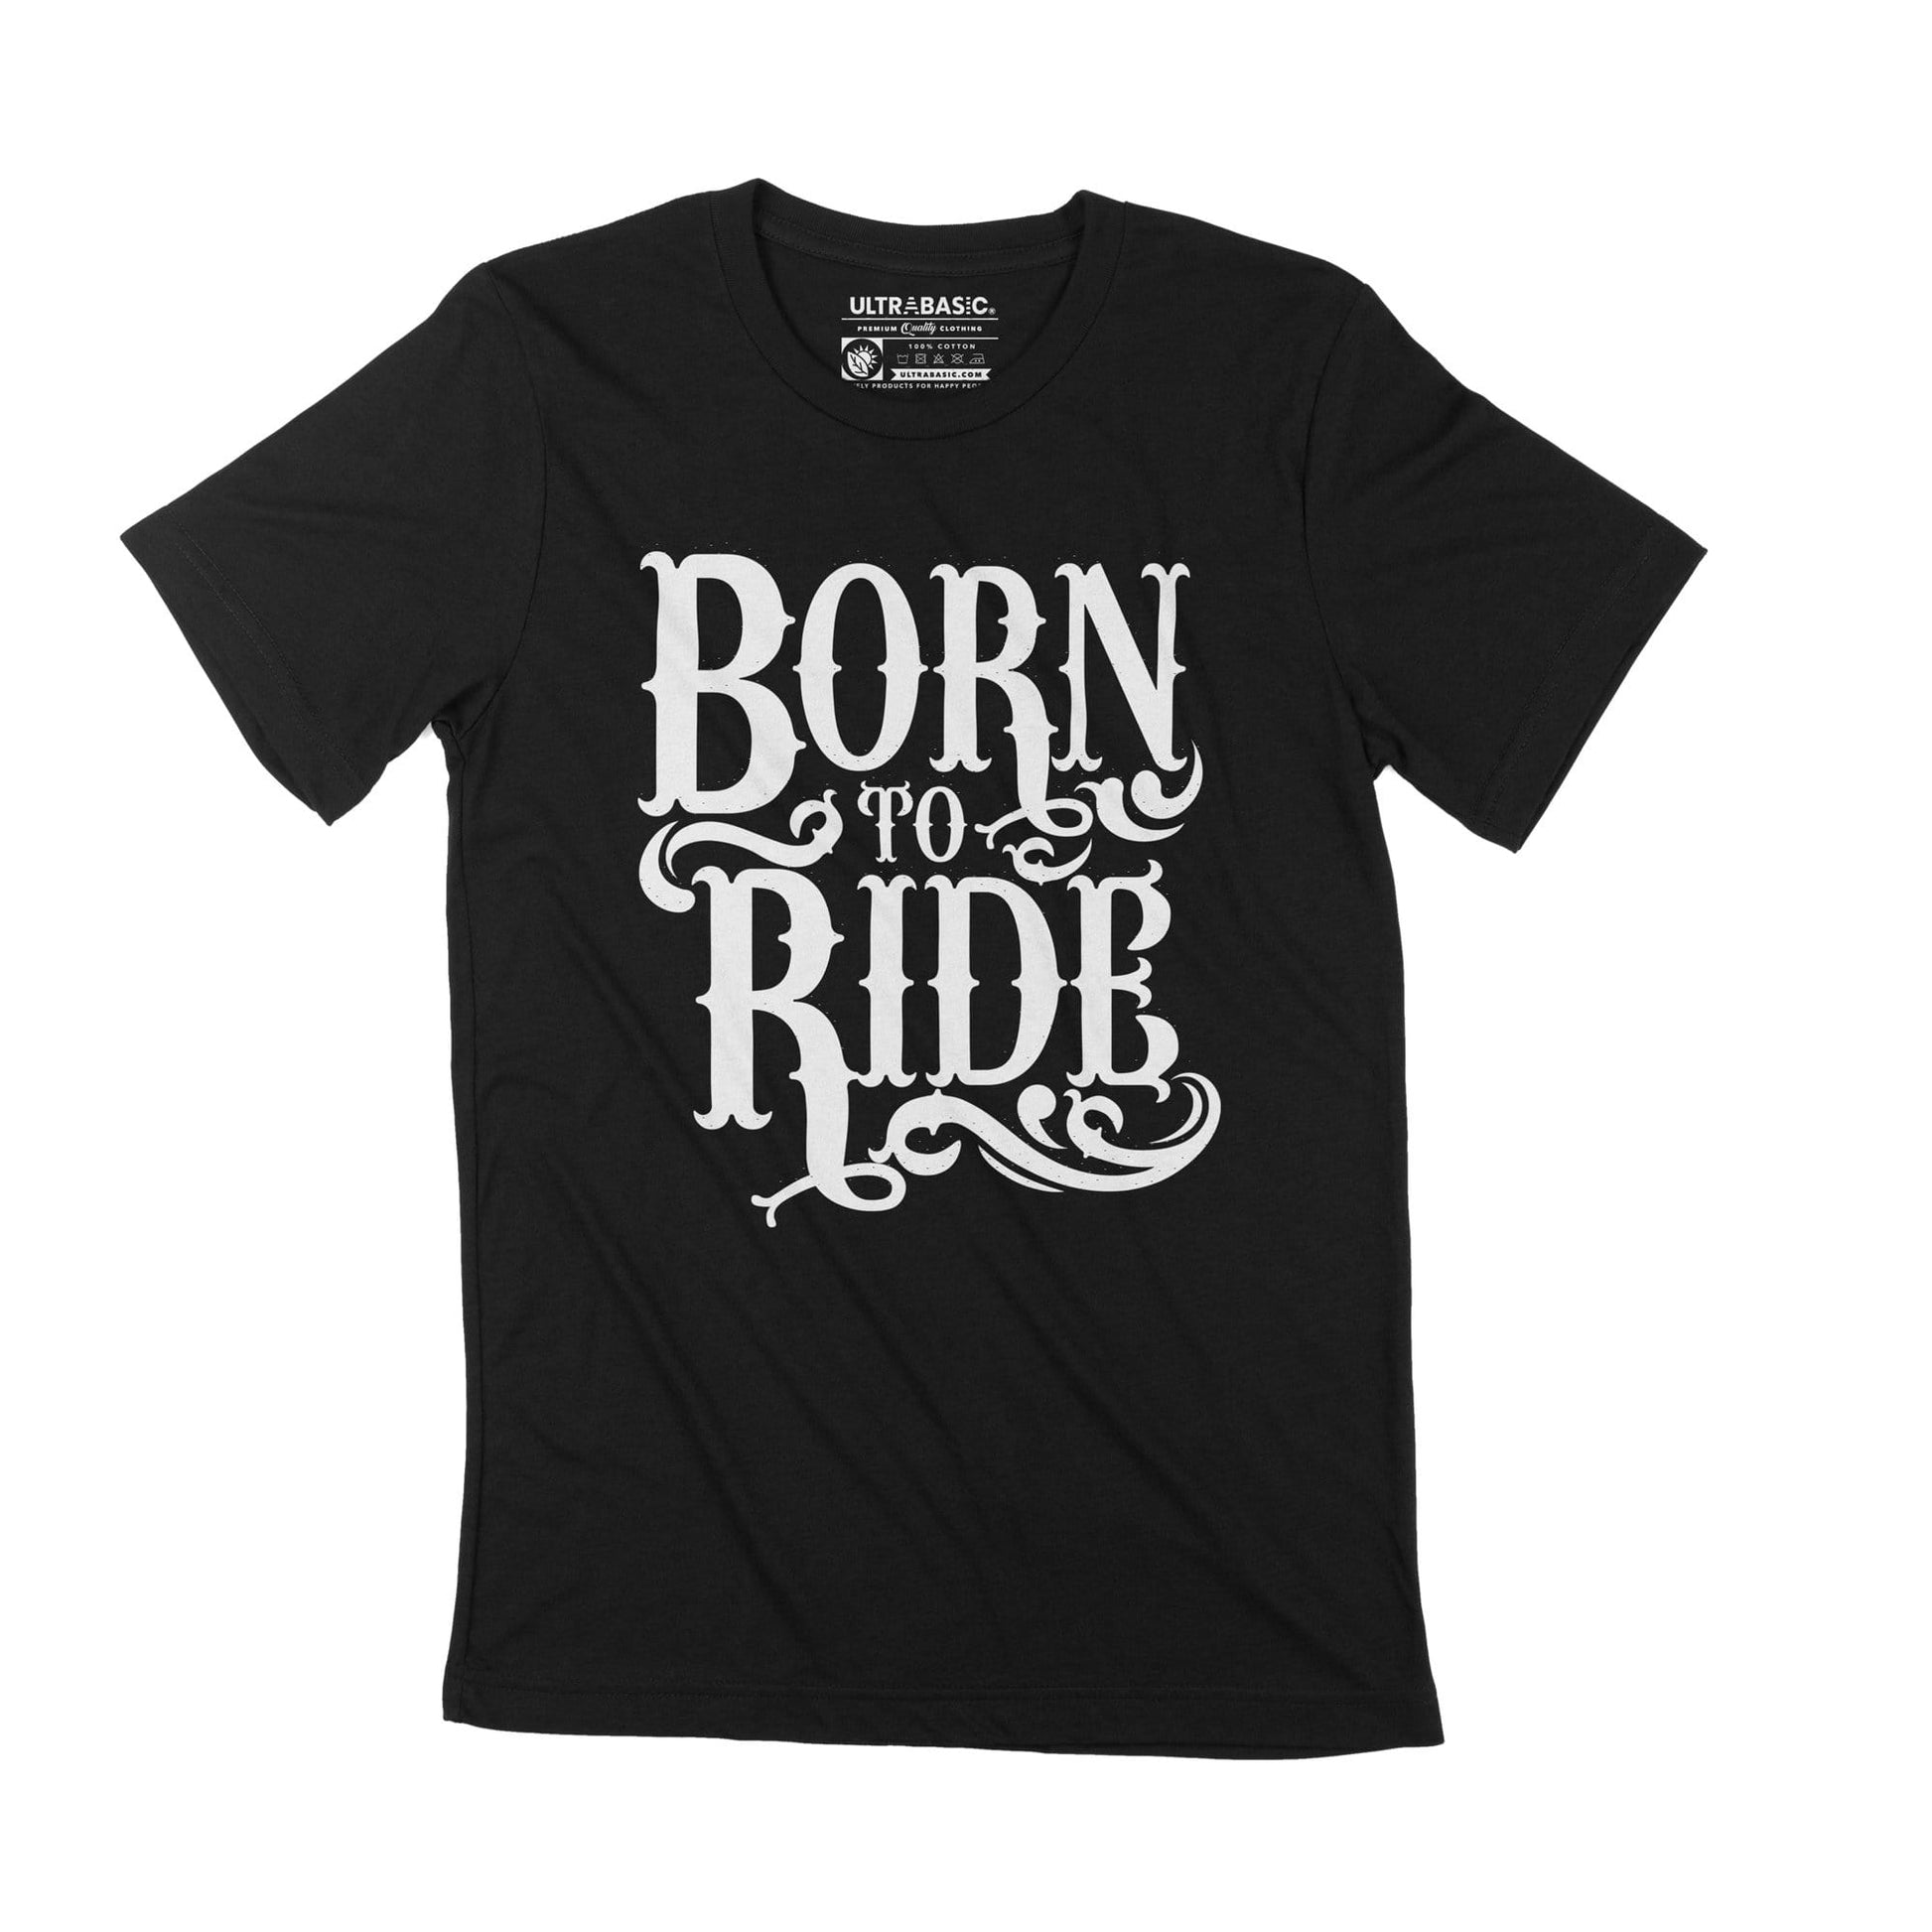 film biker motorcycle skateboard graphic short sleeve gift birthday casual lucky men fashion jeep cool outfit family popular action women simple unique best cute friends valentines gym fitness athletic legendary youth cotton classic outdoor horse